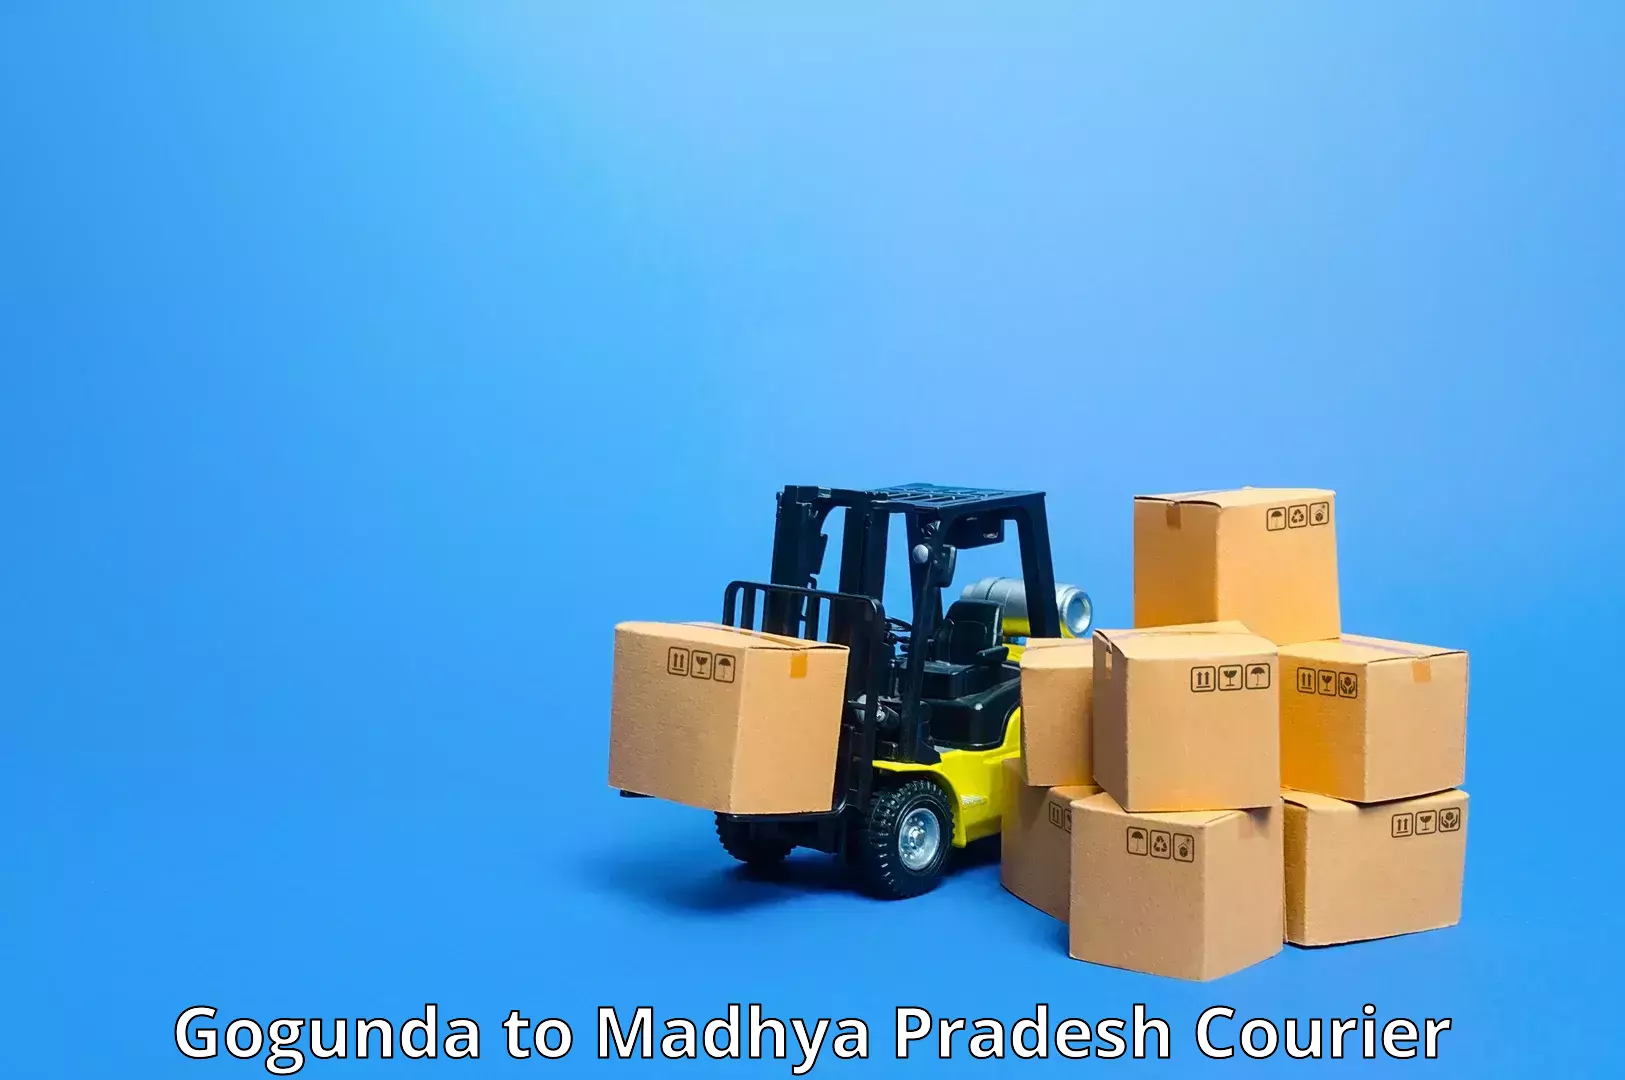 Flexible delivery schedules Gogunda to Anuppur